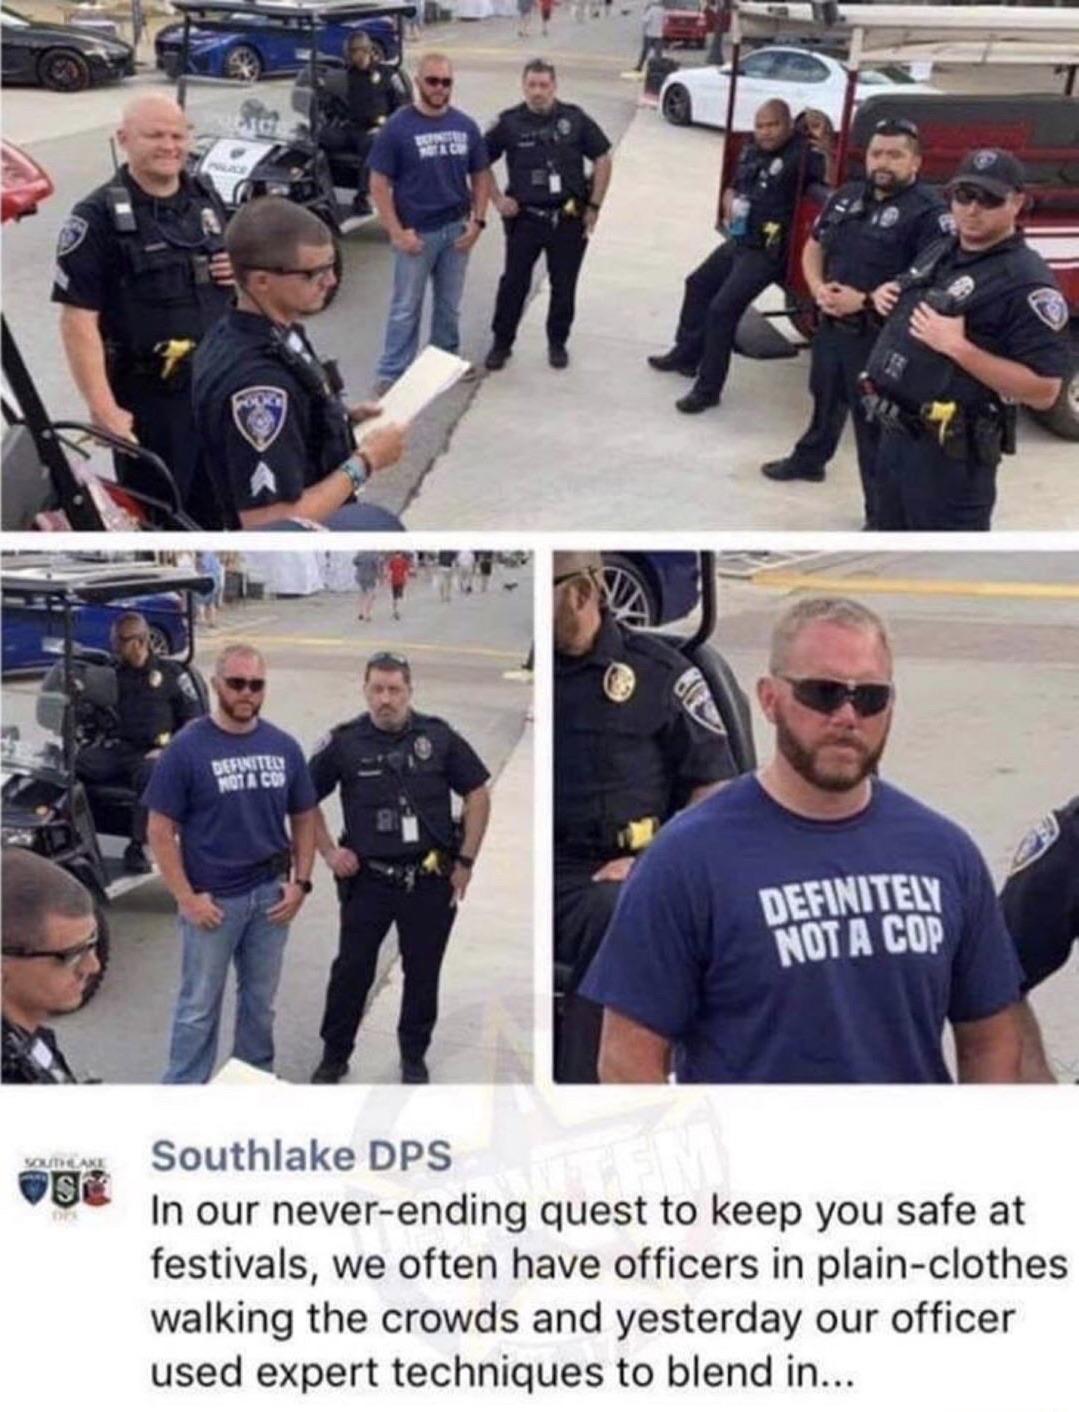 meme definitely not a cop shirt - Definitely Not A Cop vou Southlake Dps In our neverending quest to keep you safe at festivals, we often have officers in plainclothes walking the crowds and yesterday our officer used expert techniques to blend in...